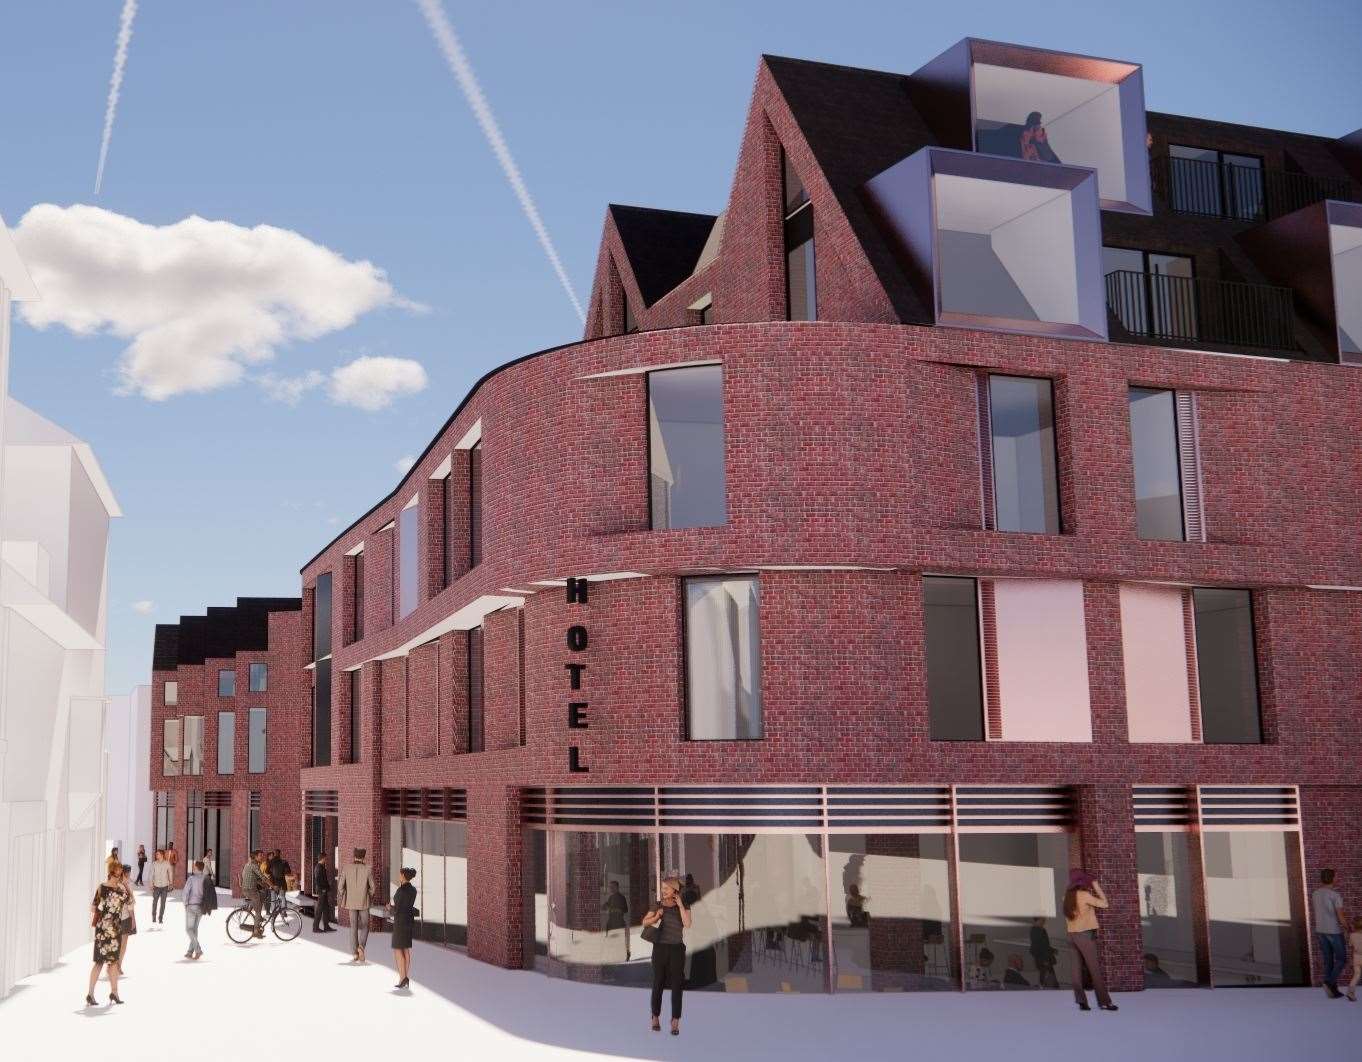 Plans have been submitted to Ashford Borough Council for a 92-bed hotel in New Rents